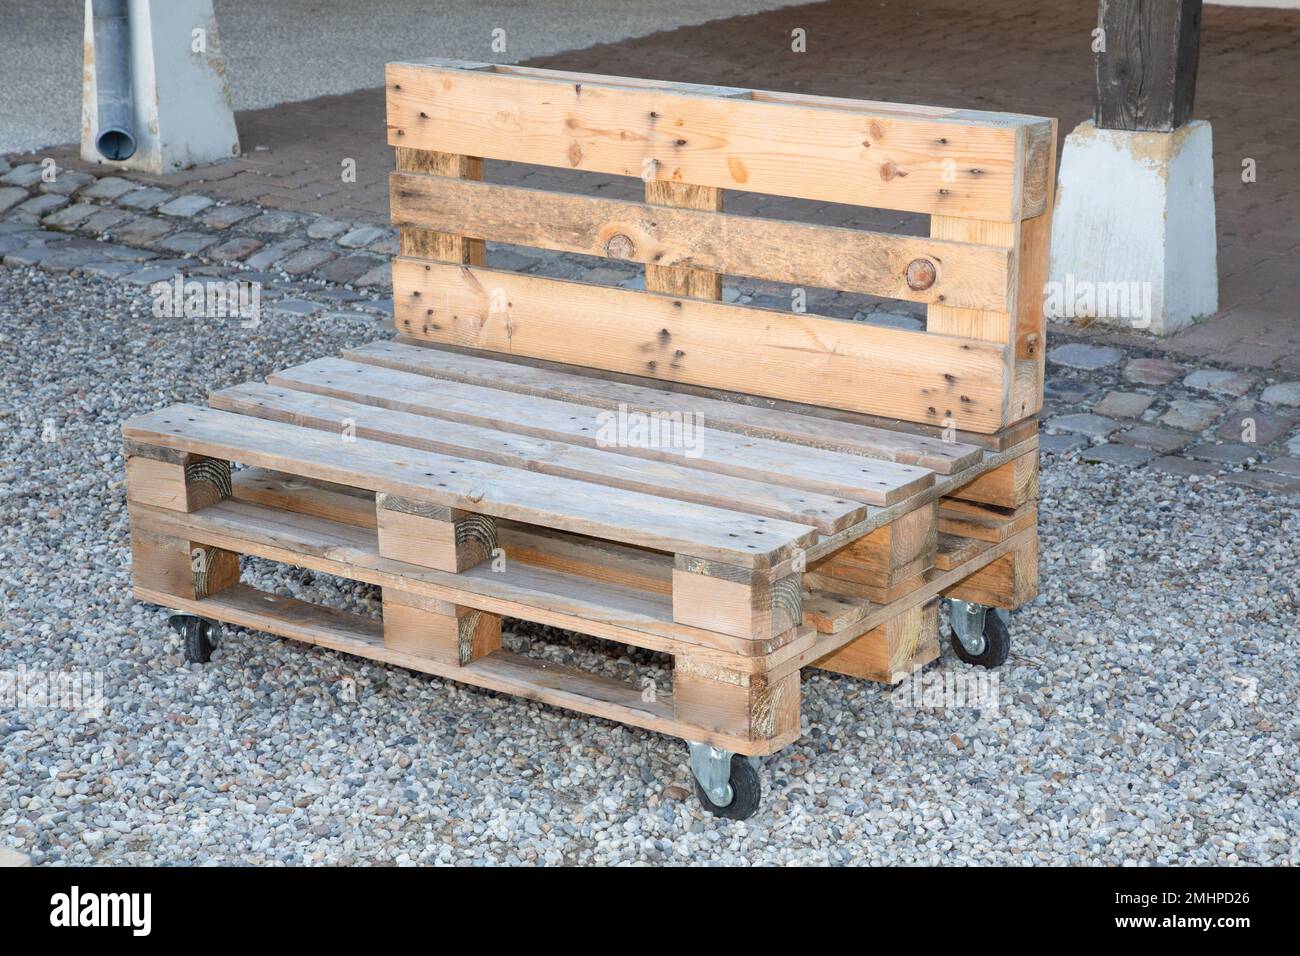 exterior bench diy industrial recycled made from old wooden storage pallets  Stock Photo - Alamy